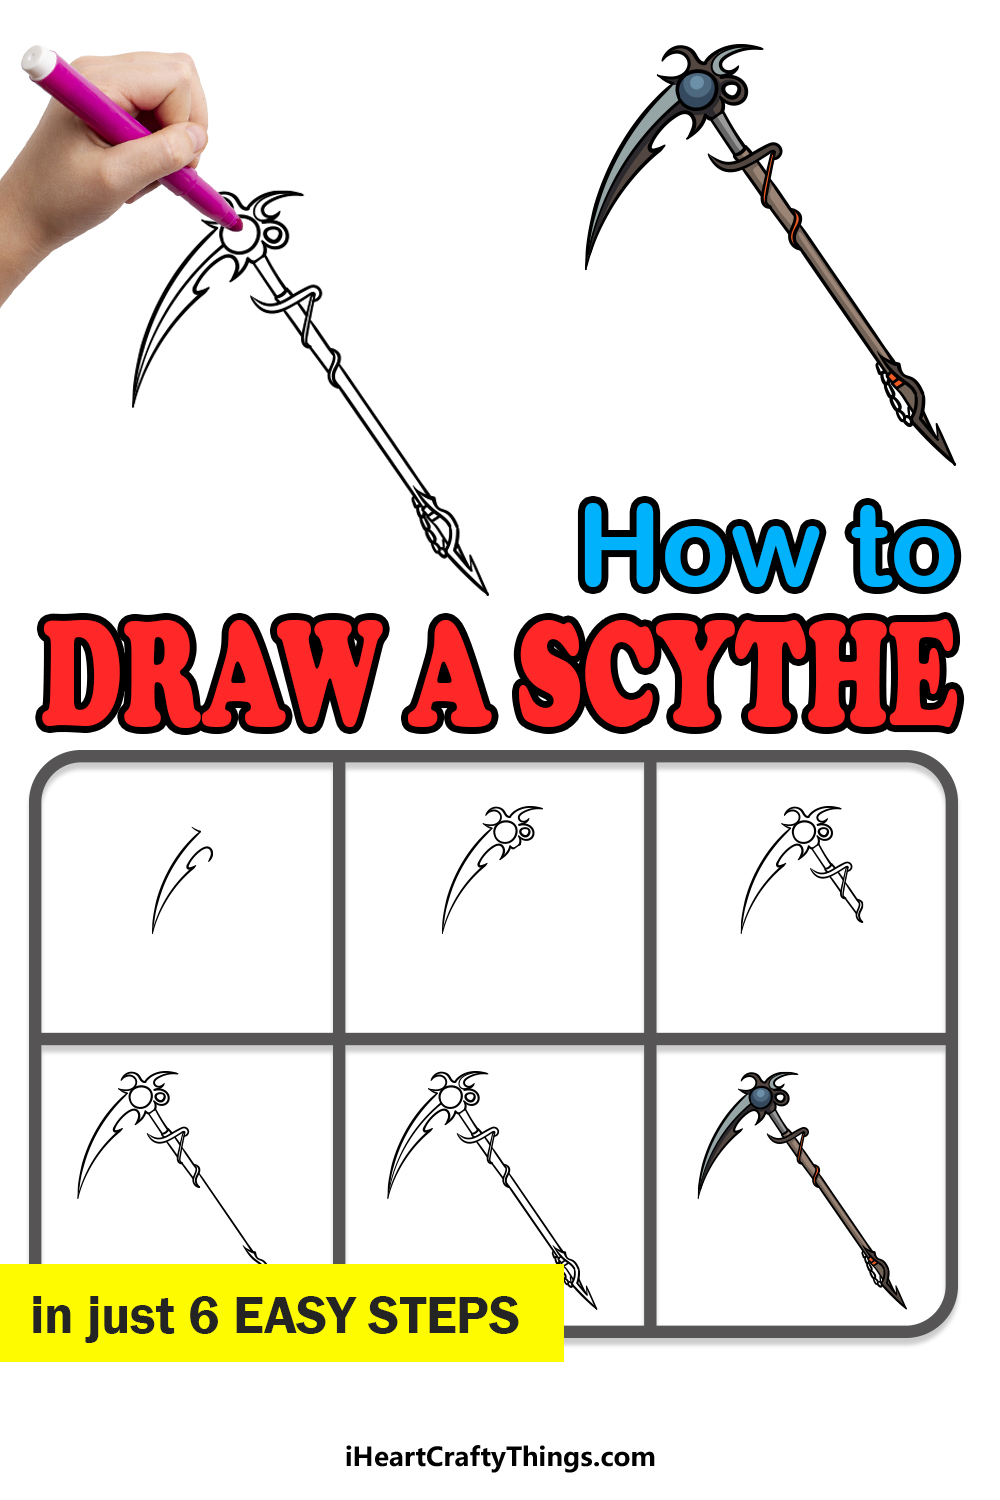 how to draw a scythe in 6 easy steps